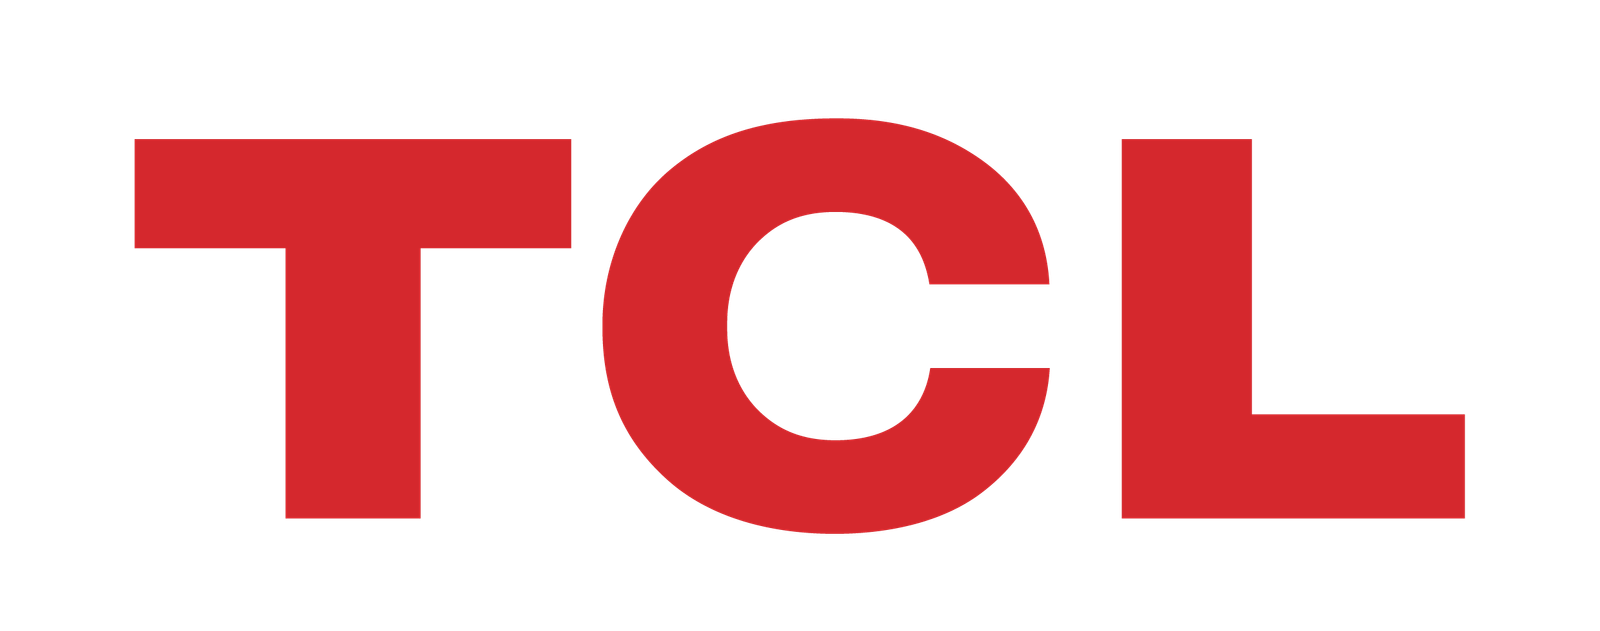 TCL Raises the Bar of Air Conditioning Technology with Next-Gen TCL FreshIN+ that Truly ‘Breathes’